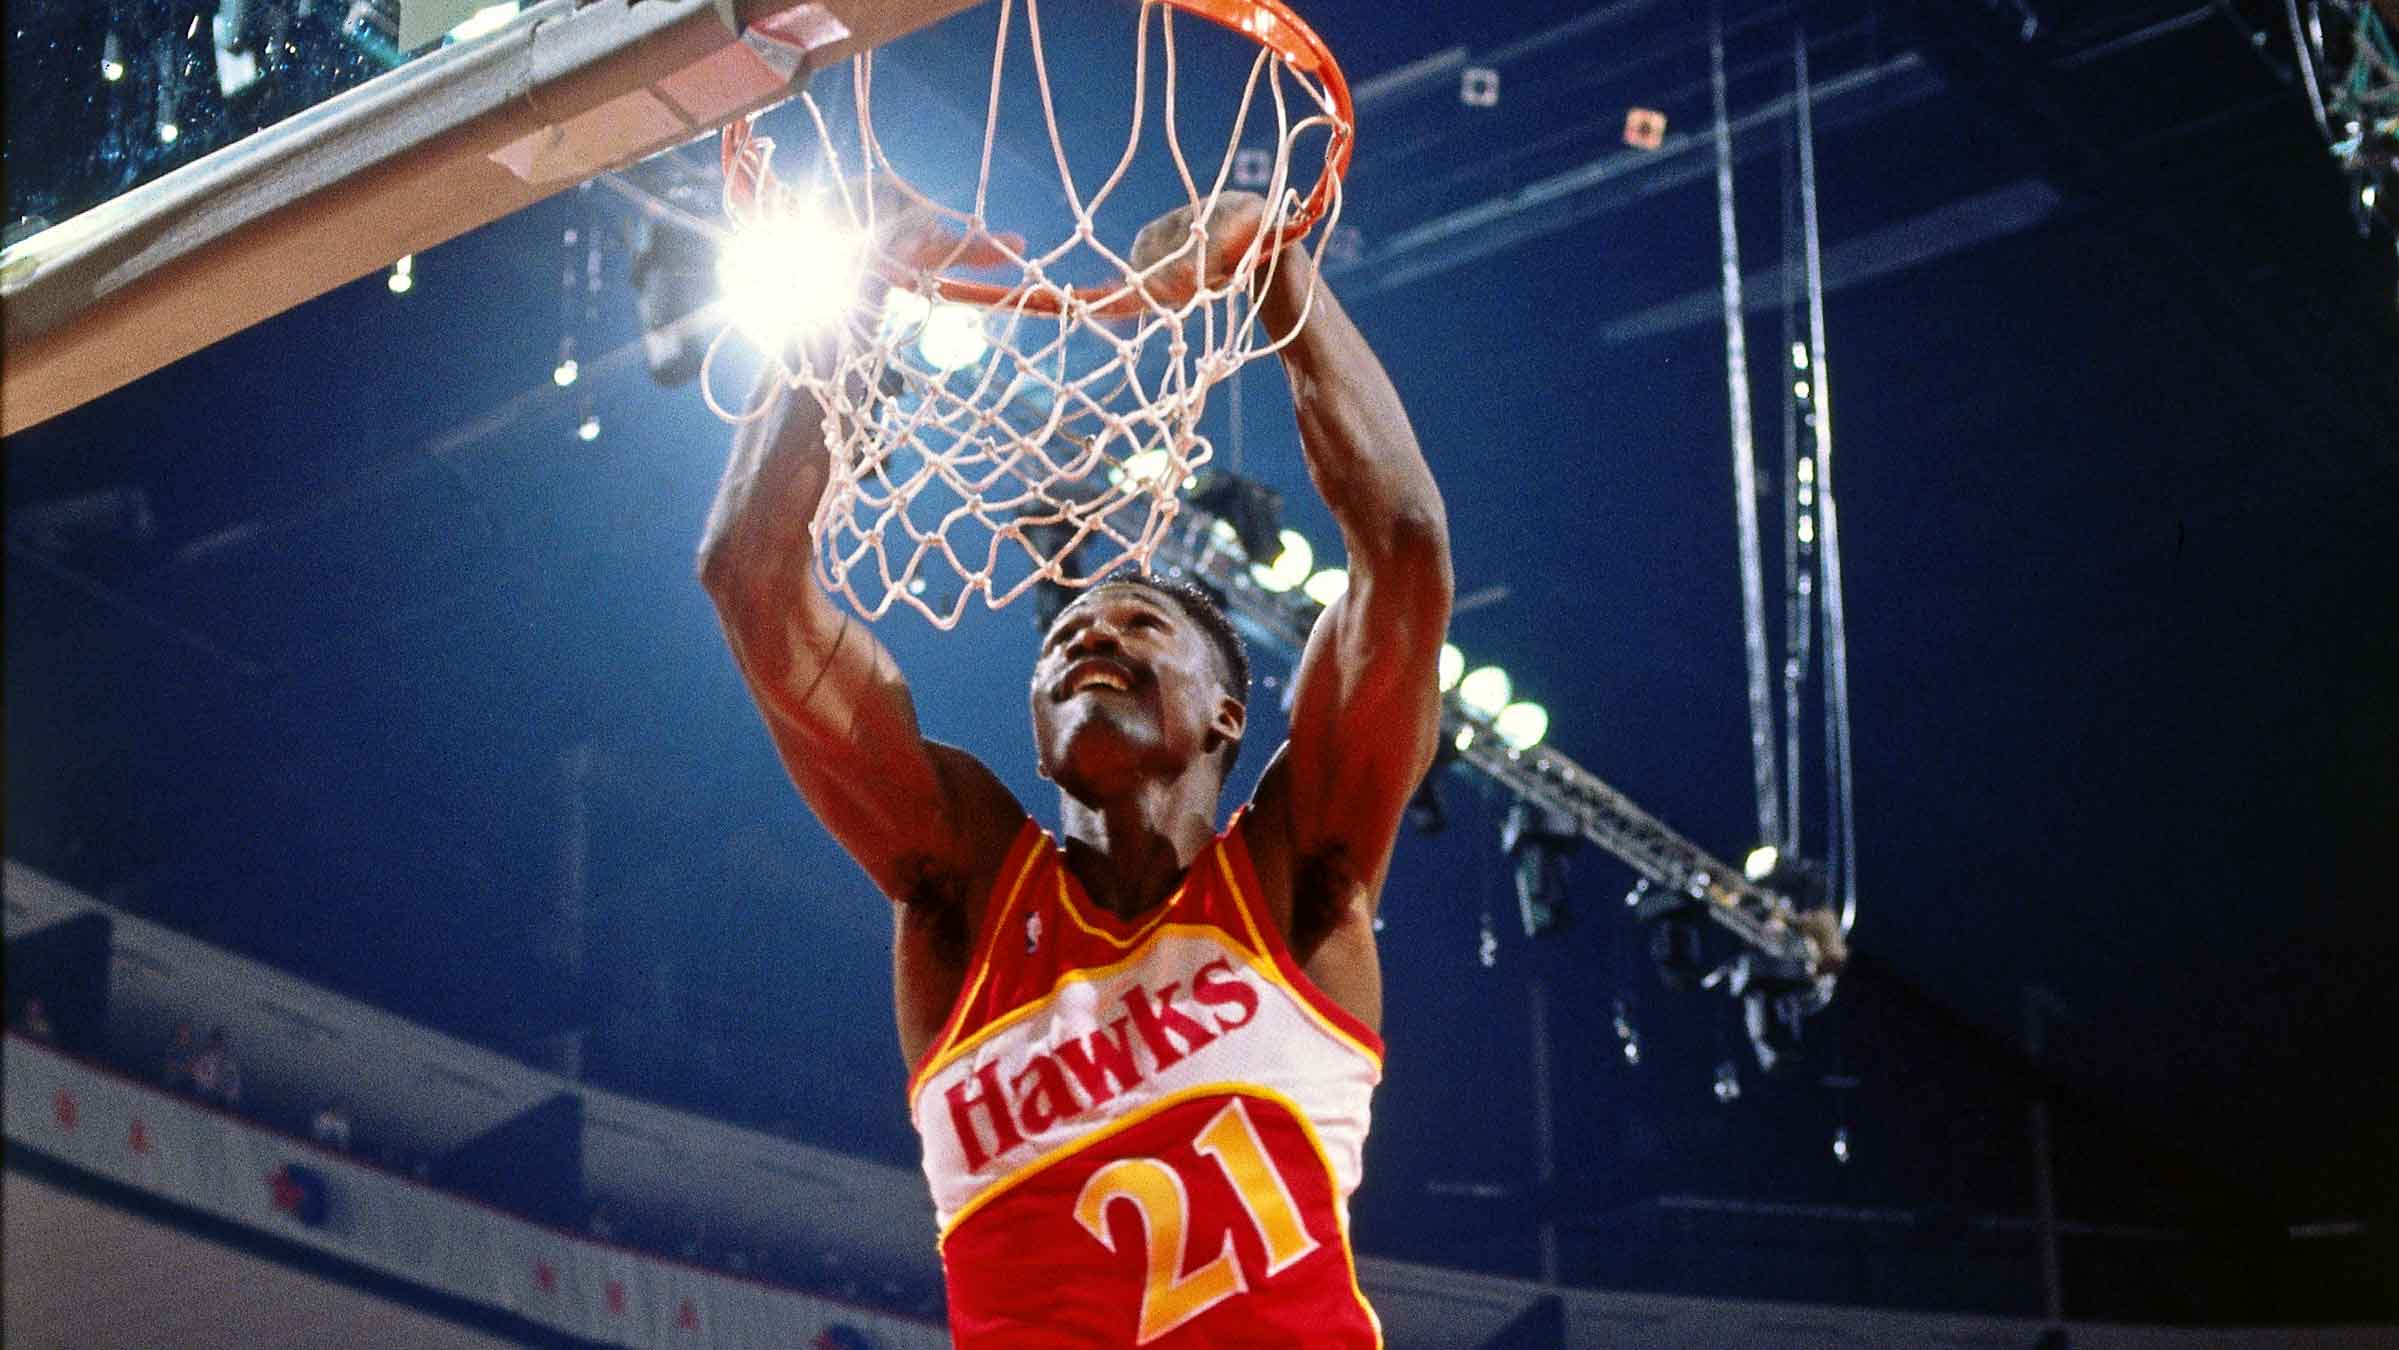 Legendary Moments In NBA History: Dominique Wilkins claims 1986 scoring crown